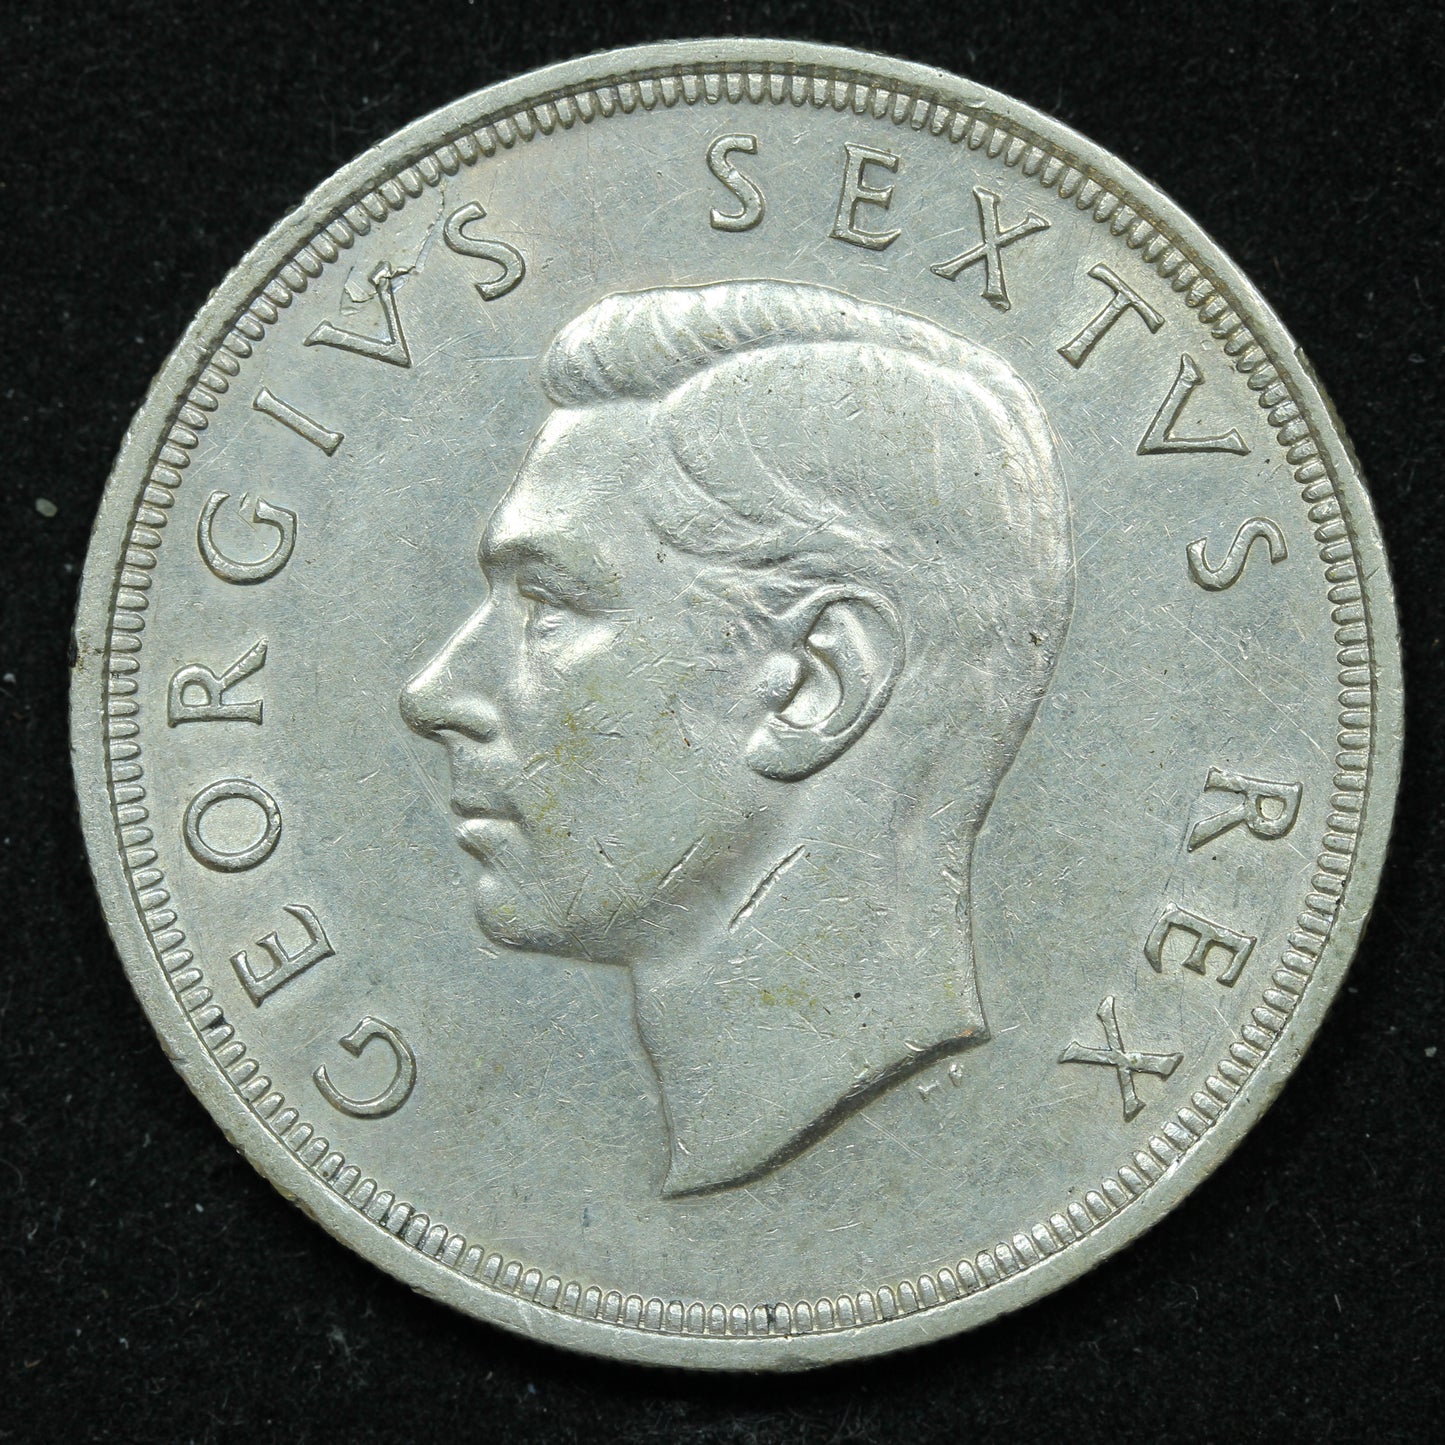 1950 South Africa 5 Five Shilling Silver Coin - KM# 40.1